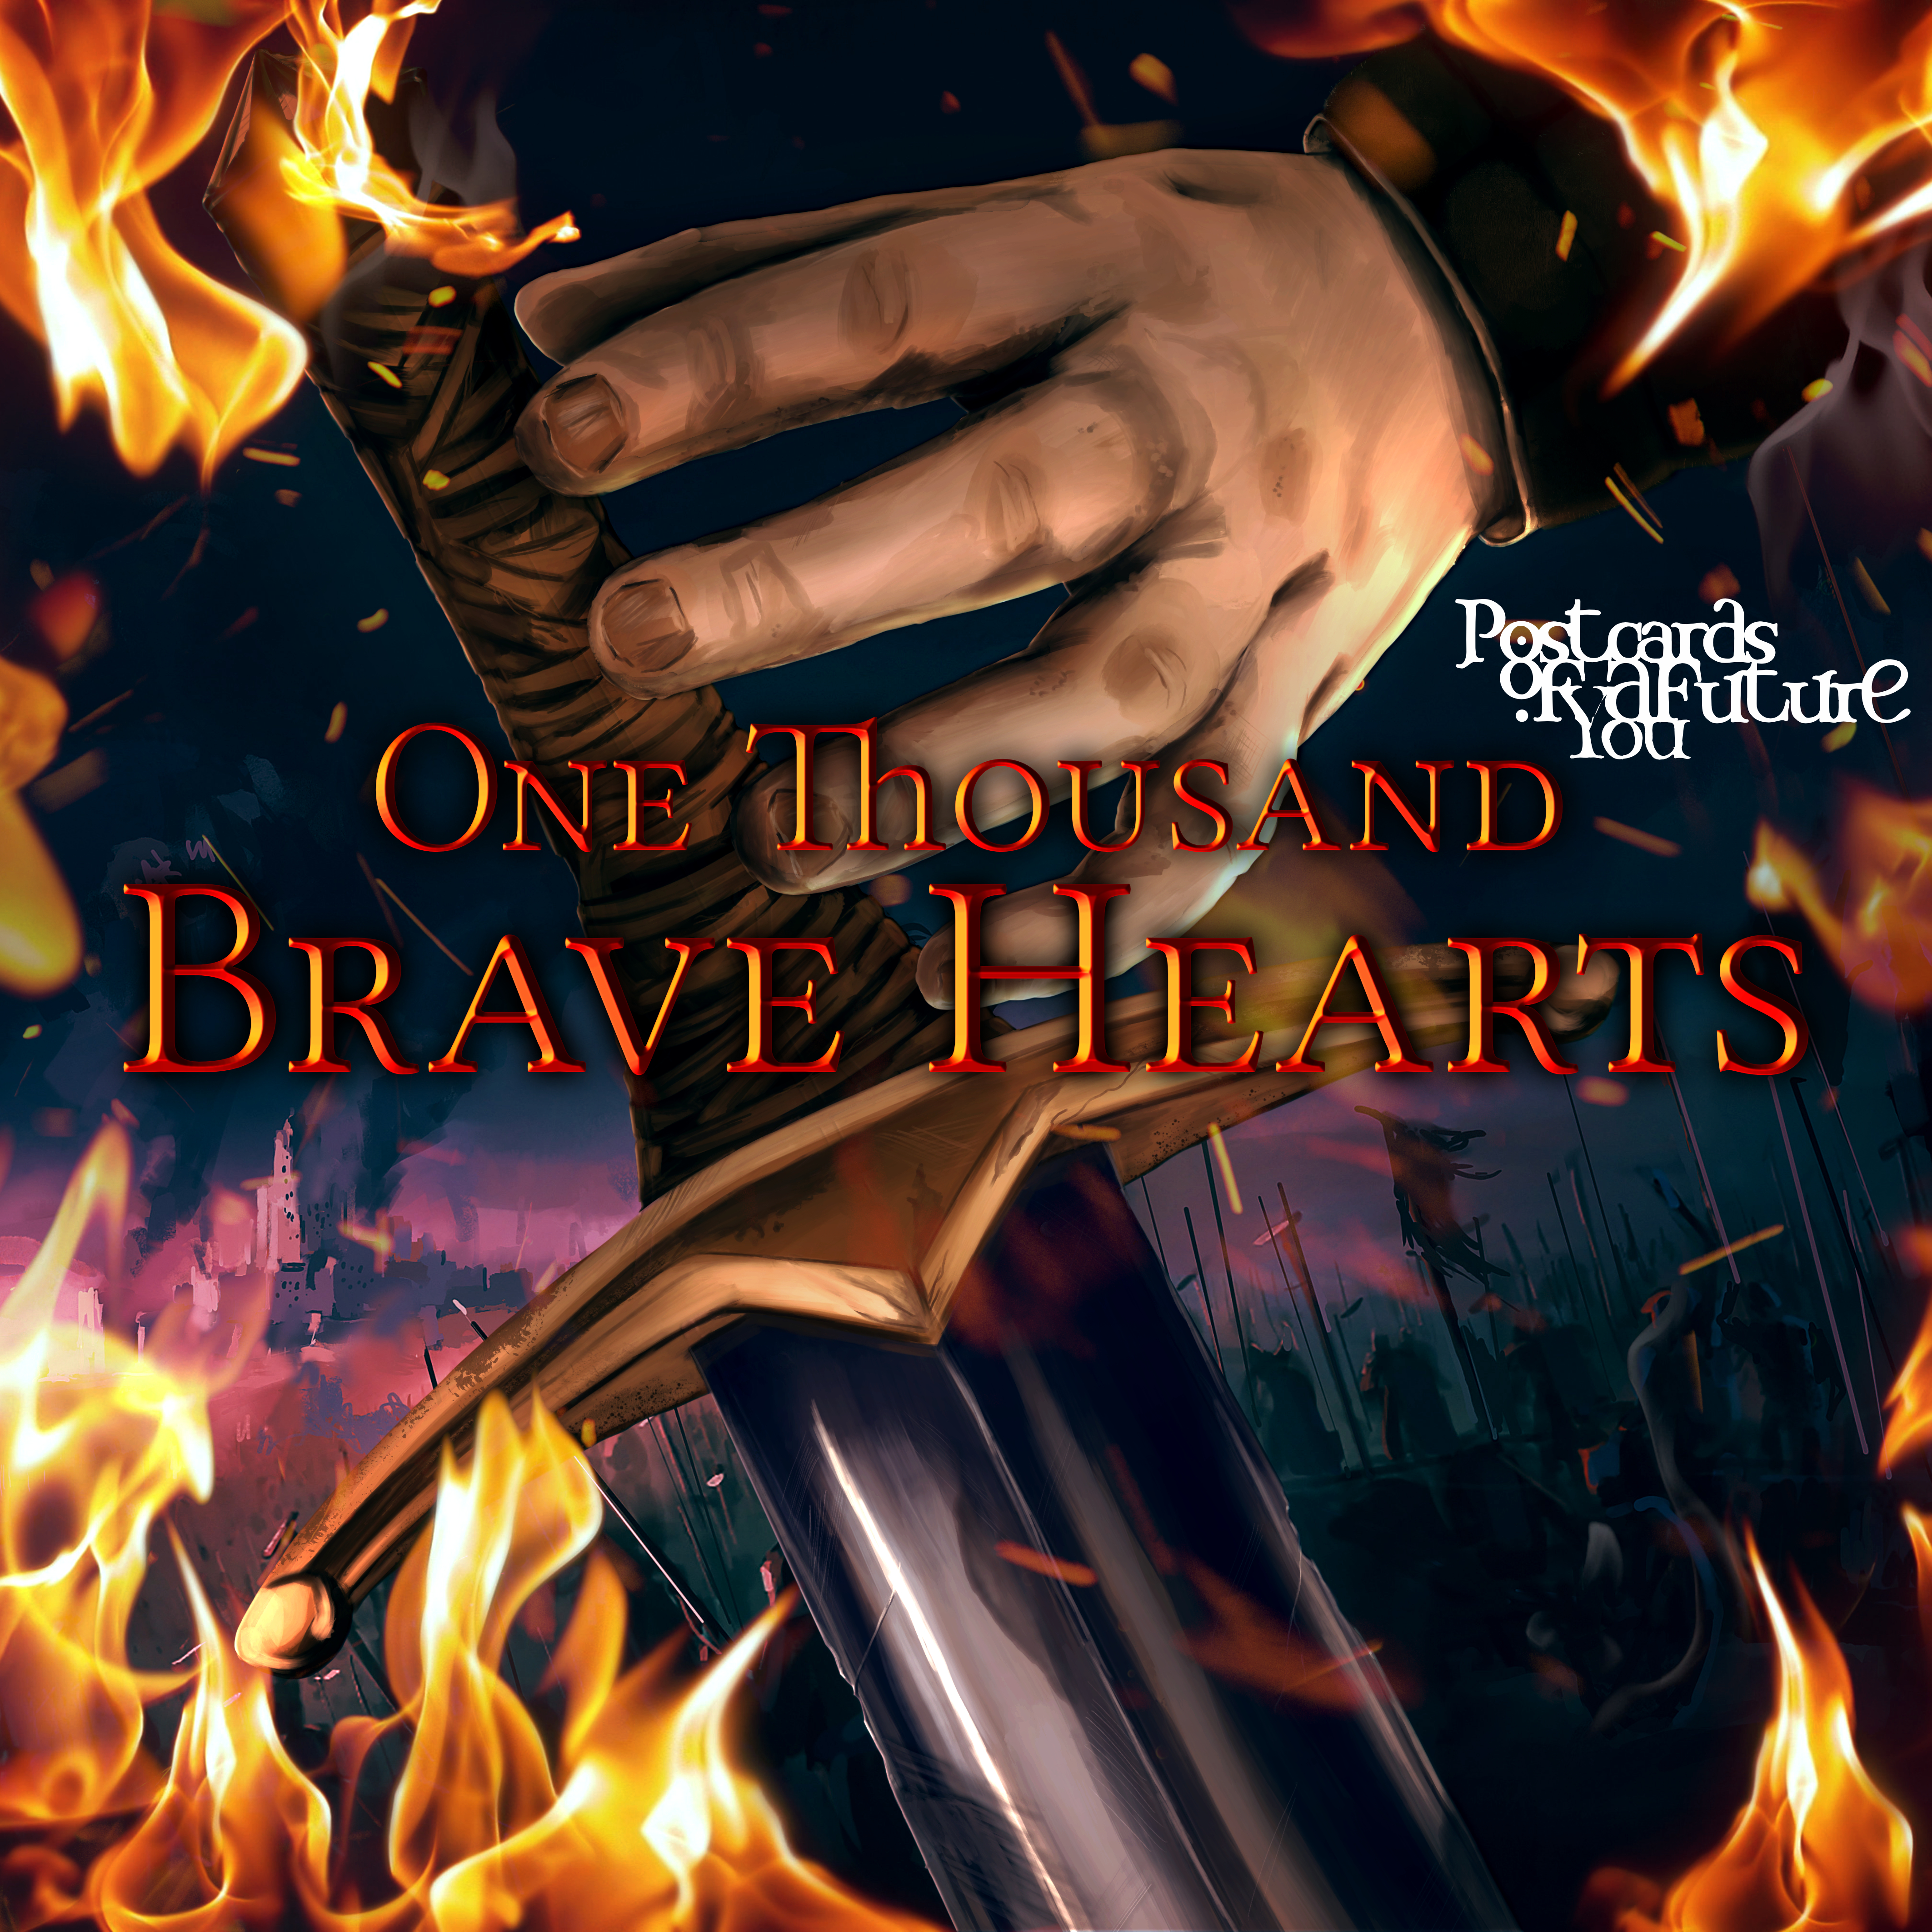 One Thousand Brave Hearts